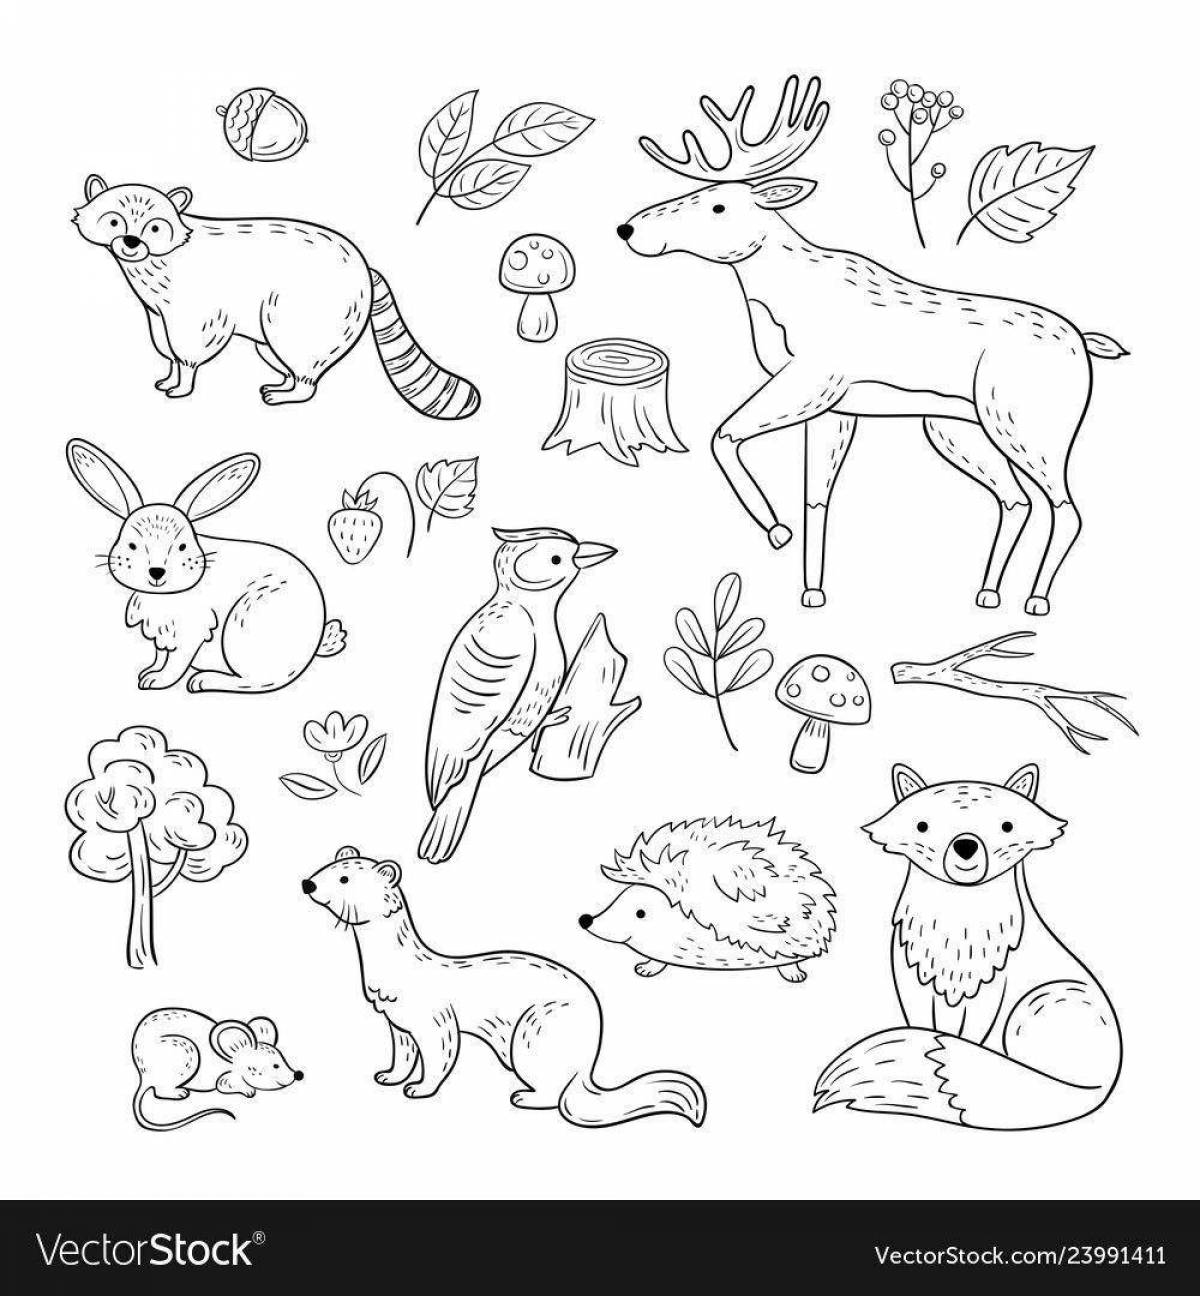 Playable forest animal coloring for kids